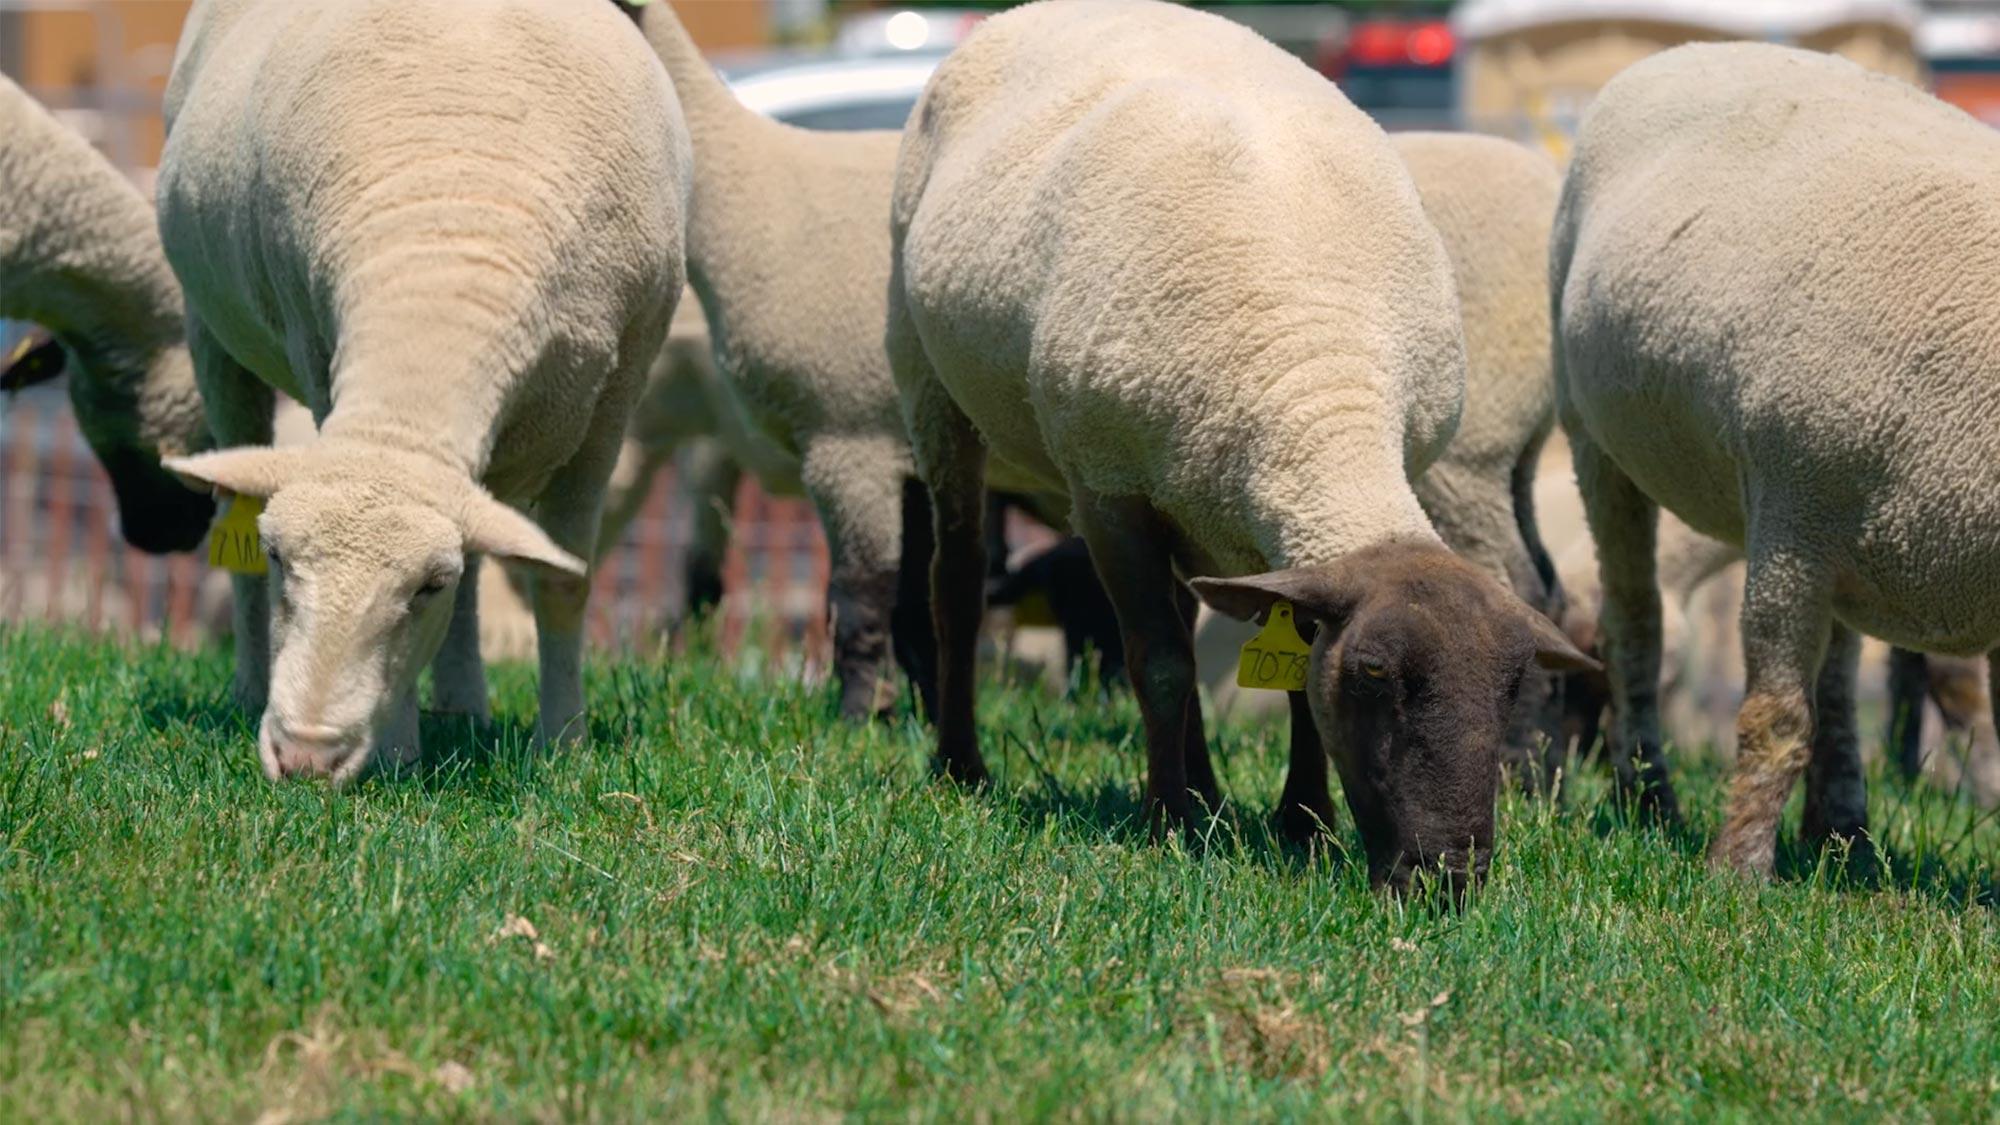 A herd of sheep chew down the grass on the ˽̳ Davis campus